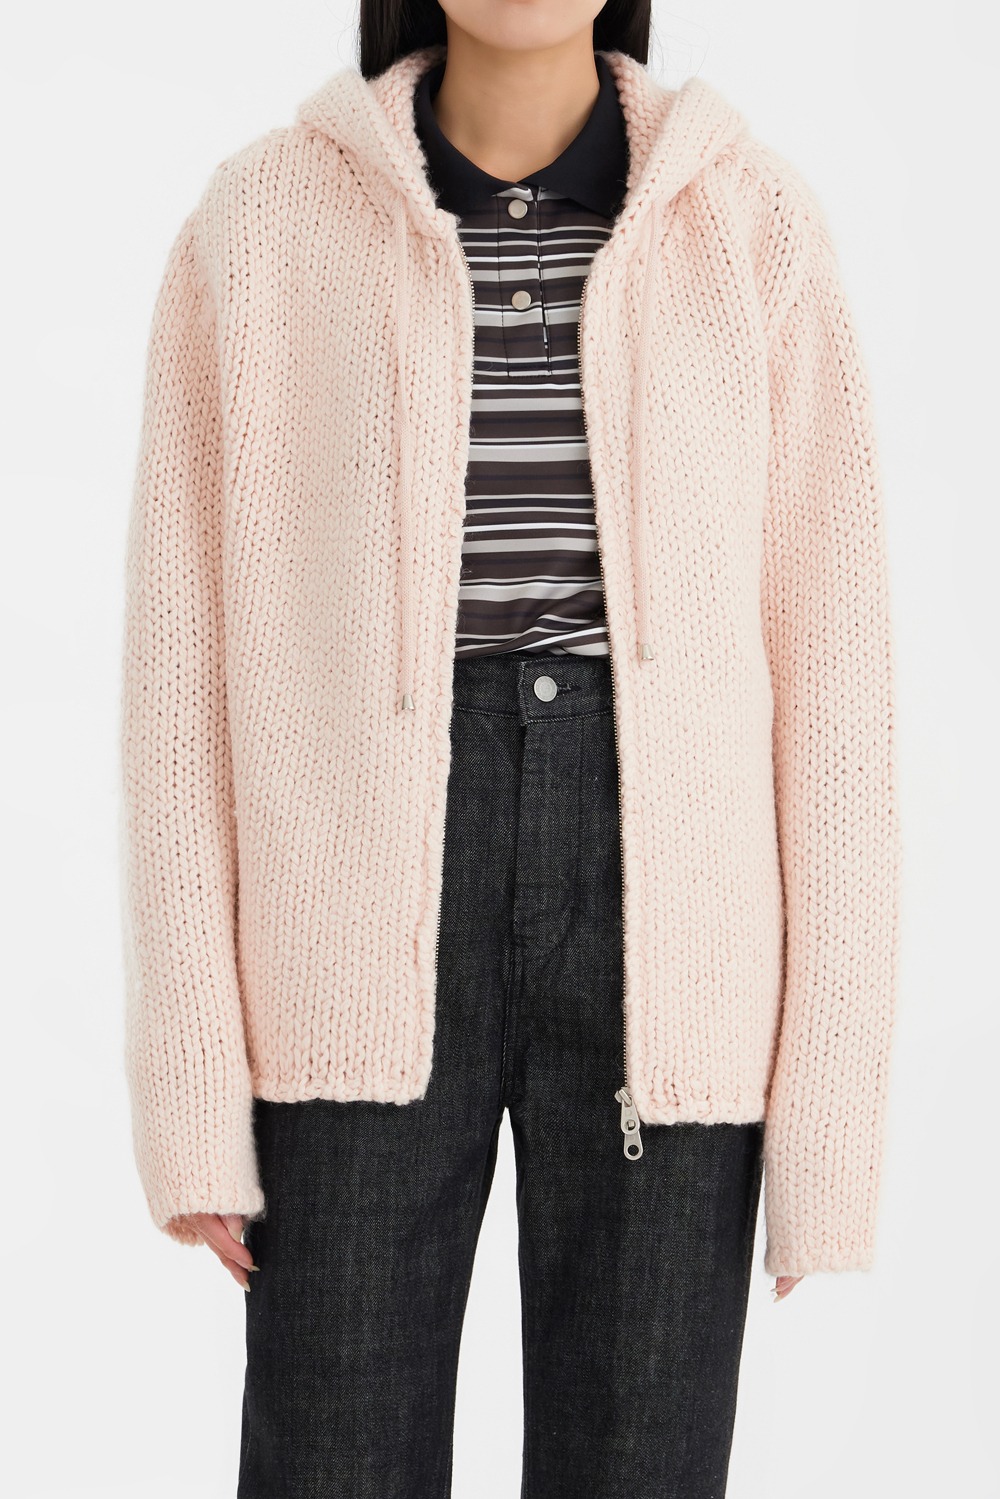 Alpaca Chunky Knitted Jacket - Pink